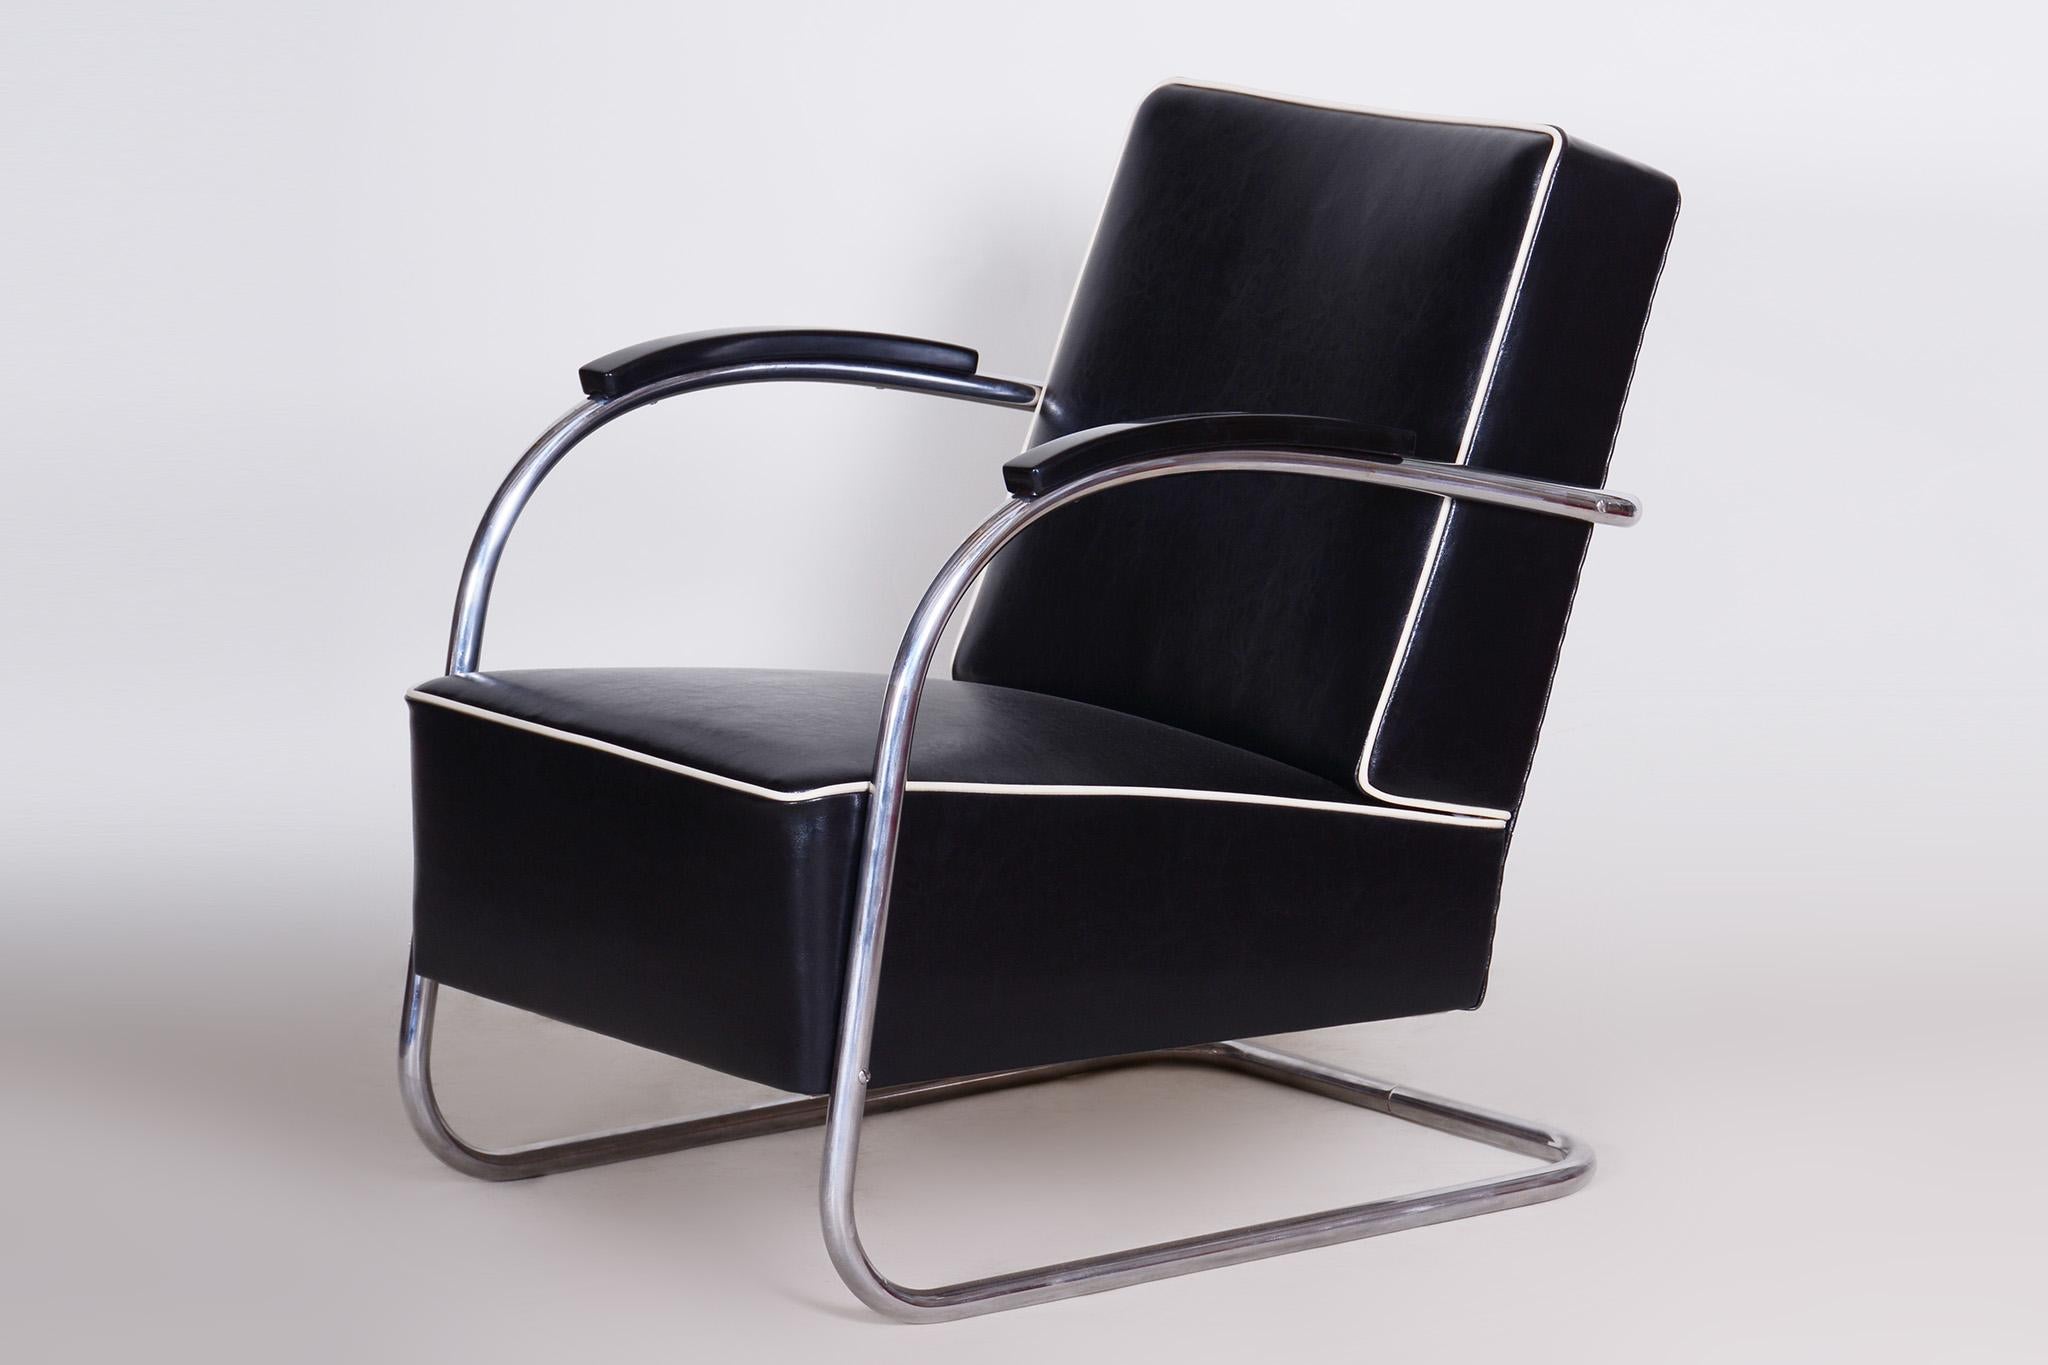 Pair of Black Bauhaus Armchairs, Made by Mucke Melder in 1930s Czechia In Good Condition For Sale In Horomerice, CZ